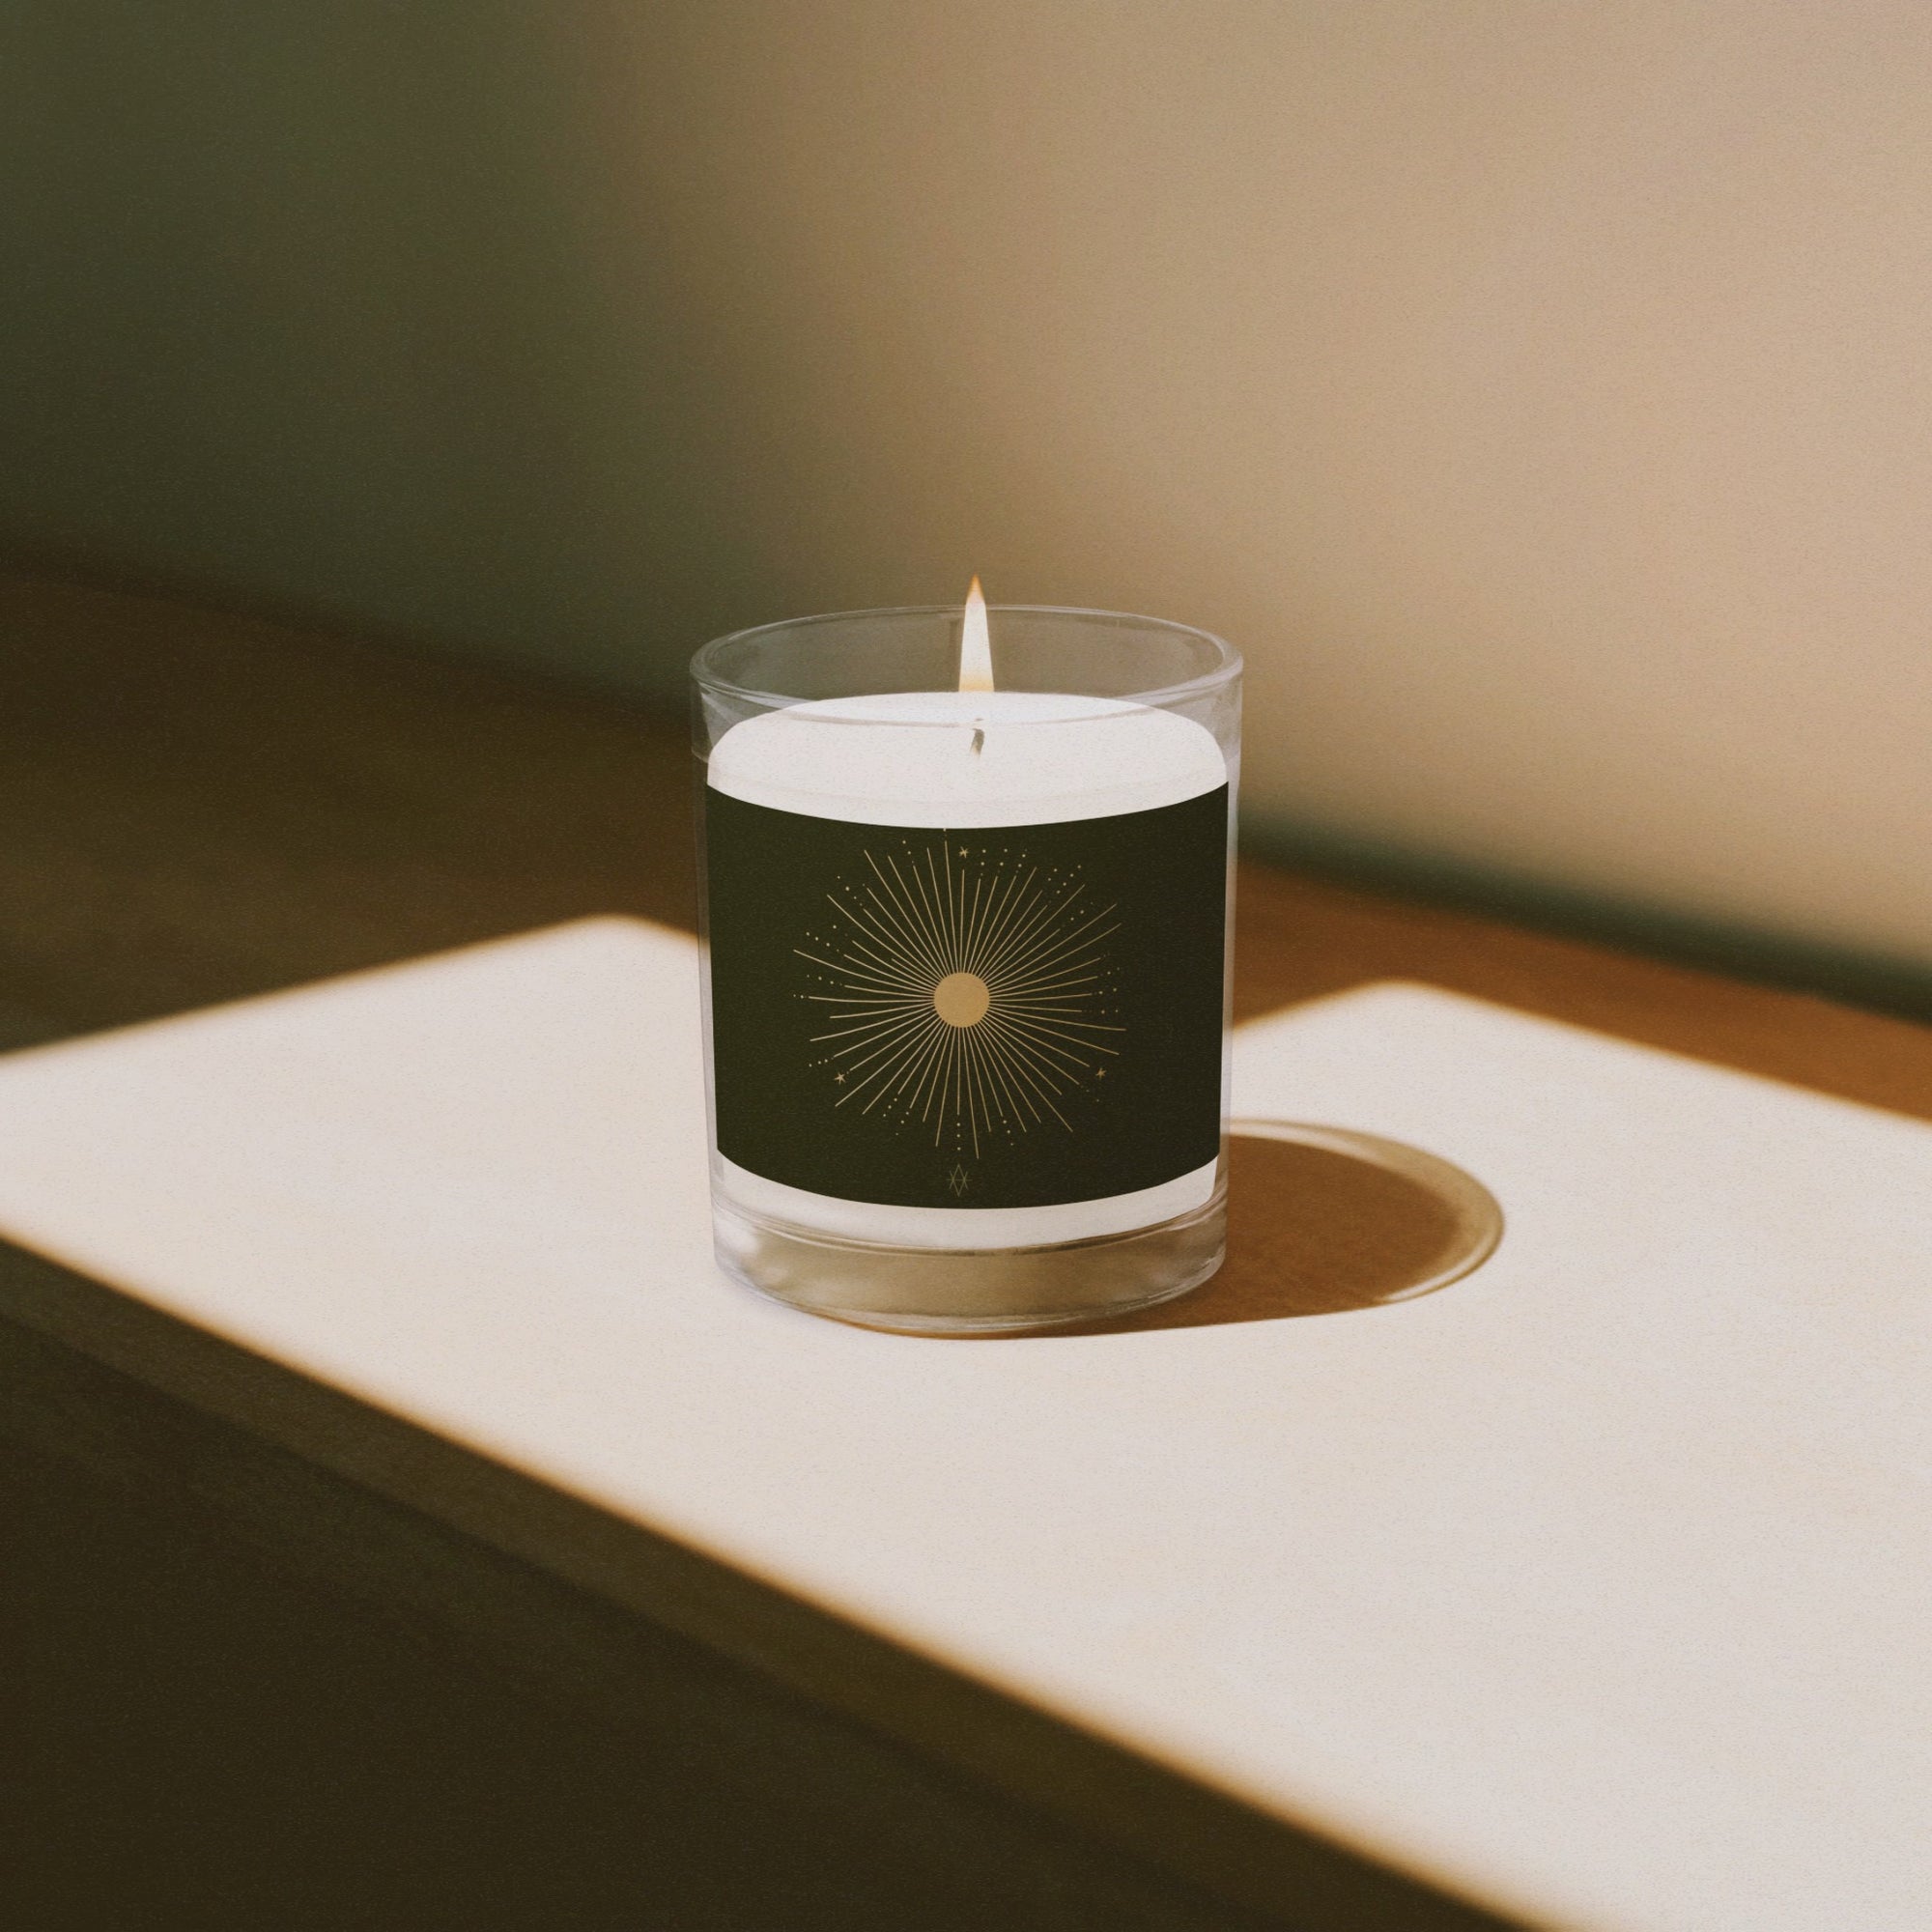 The Sun - Glass jar soy wax candle